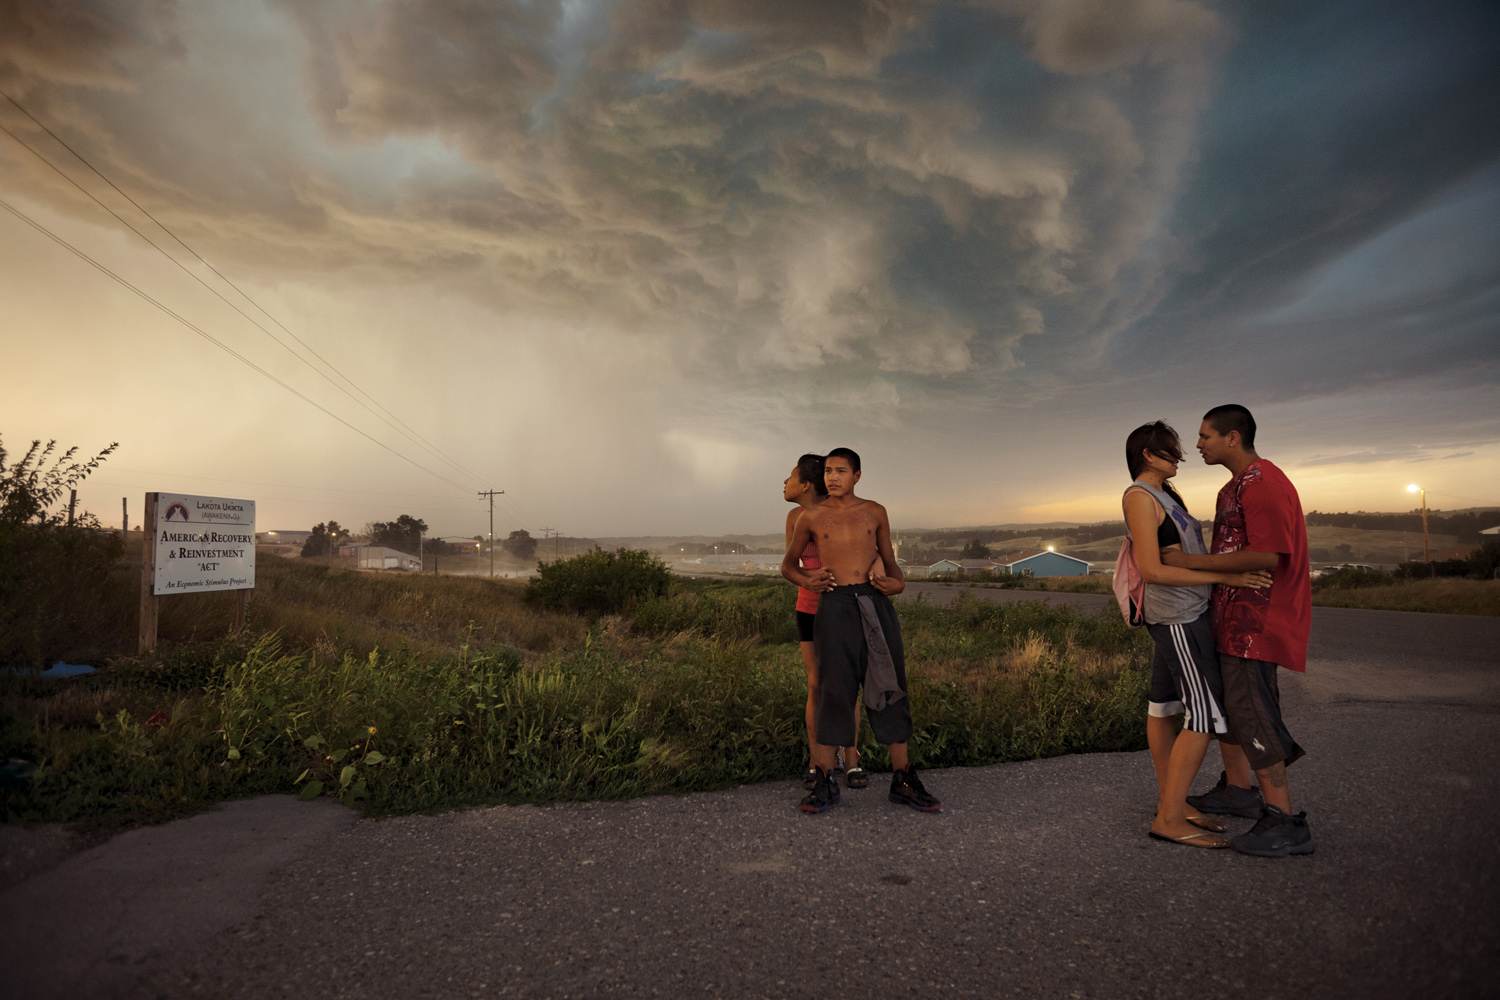 Teenagers disregard the threat of a summer storm in the town of Wounded Knee.